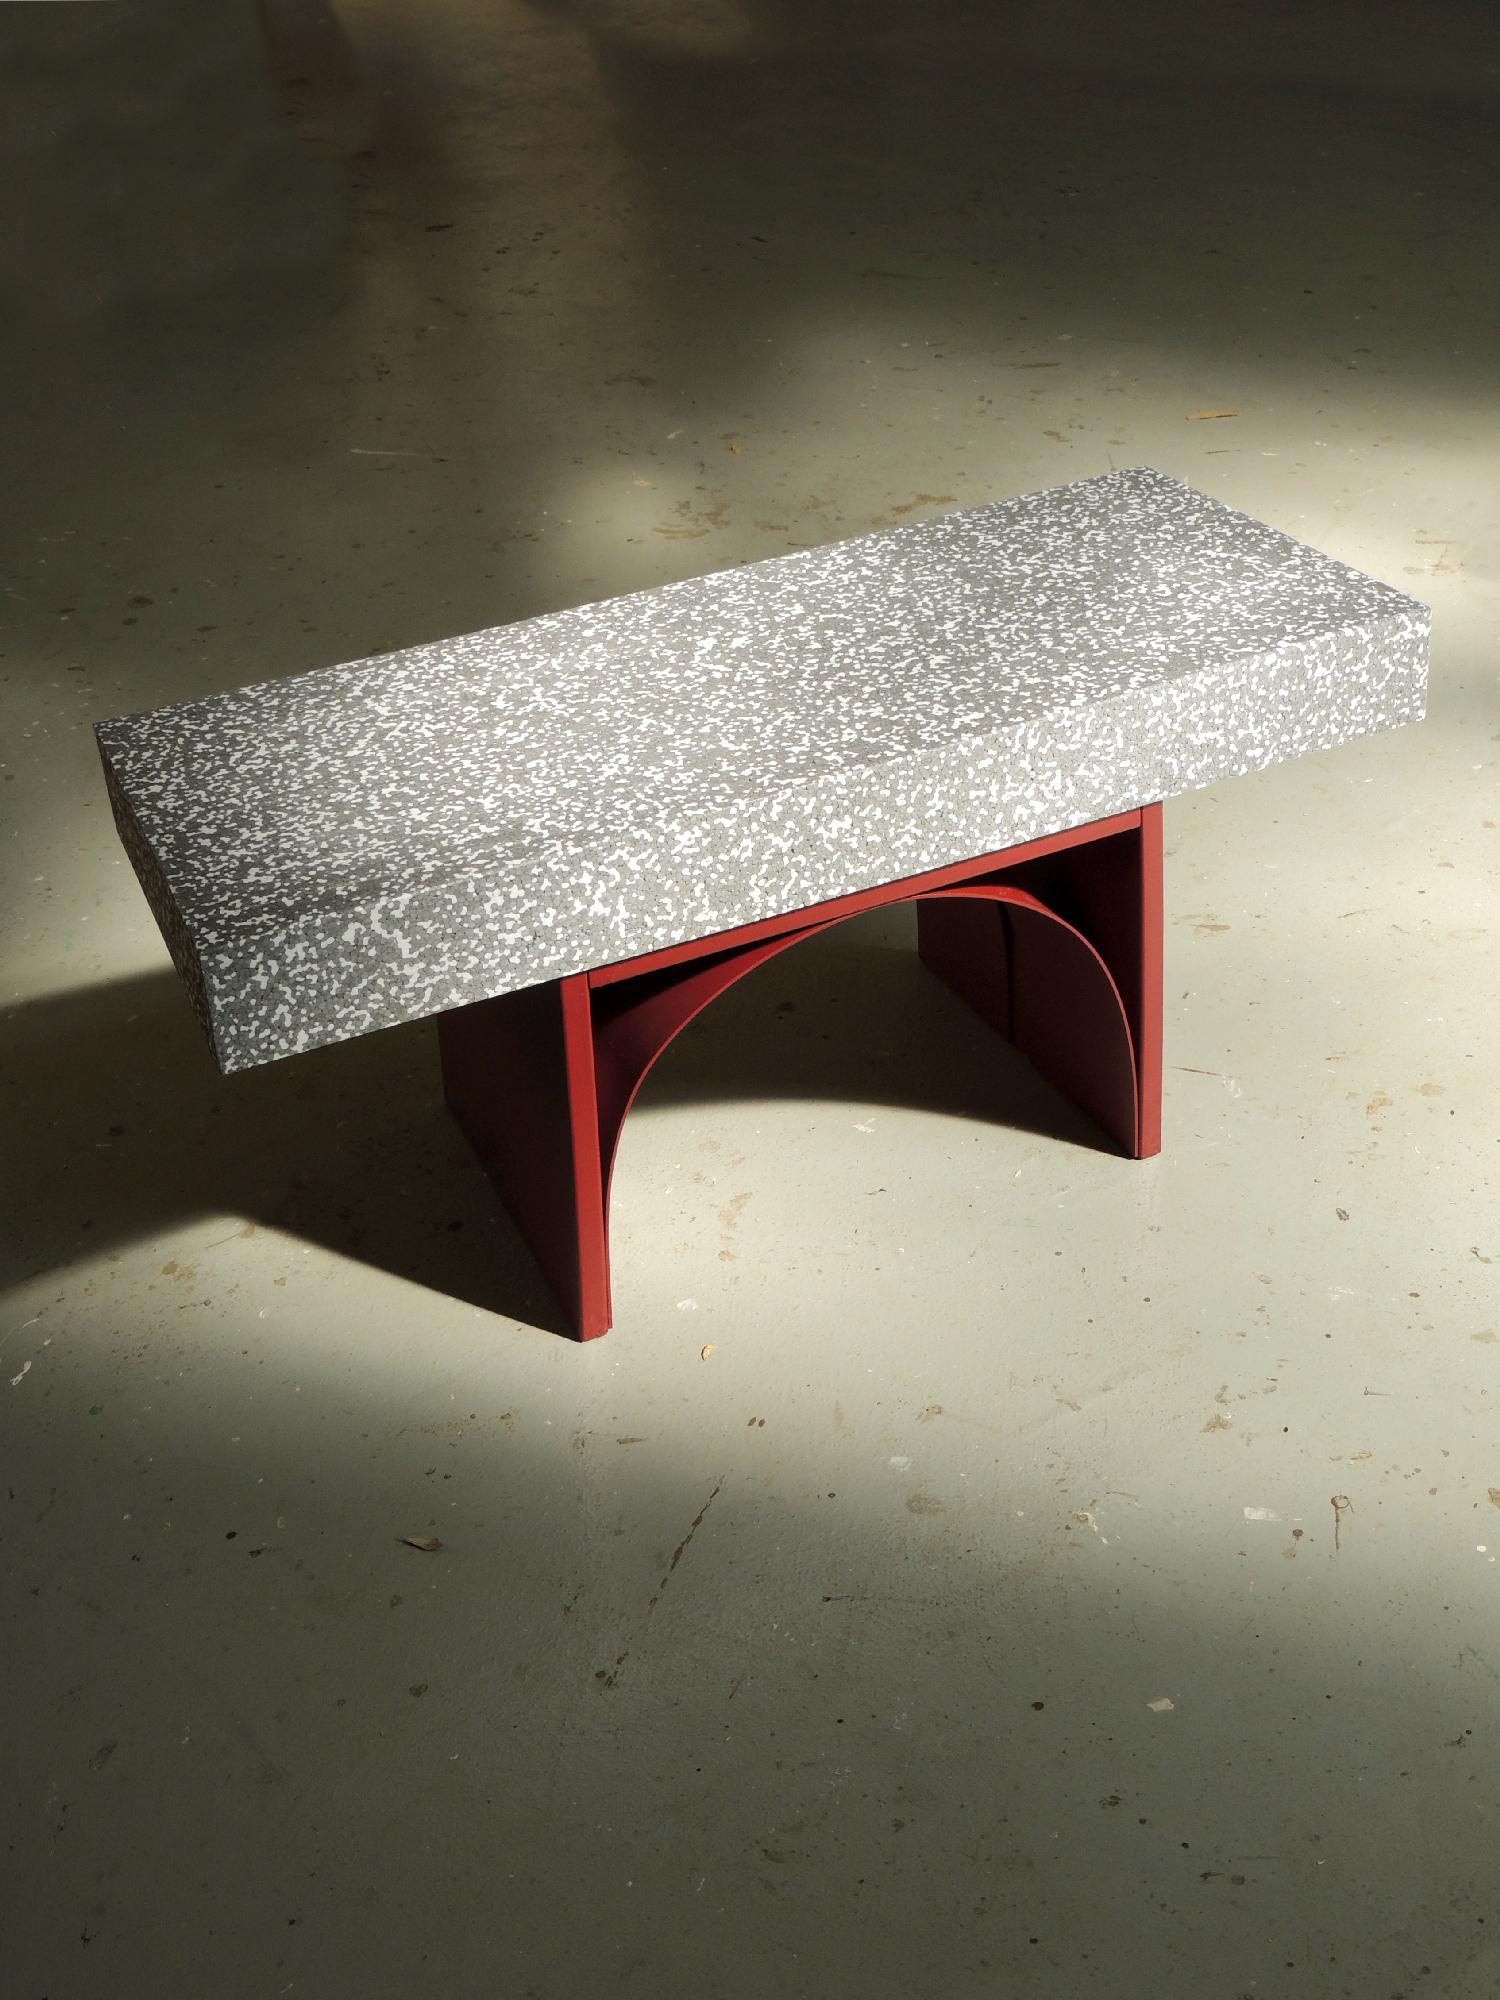 Polystyrene 21st Century Contemporary Coffee Table Bench Handmade in Italy by Ilaria Bianchi For Sale